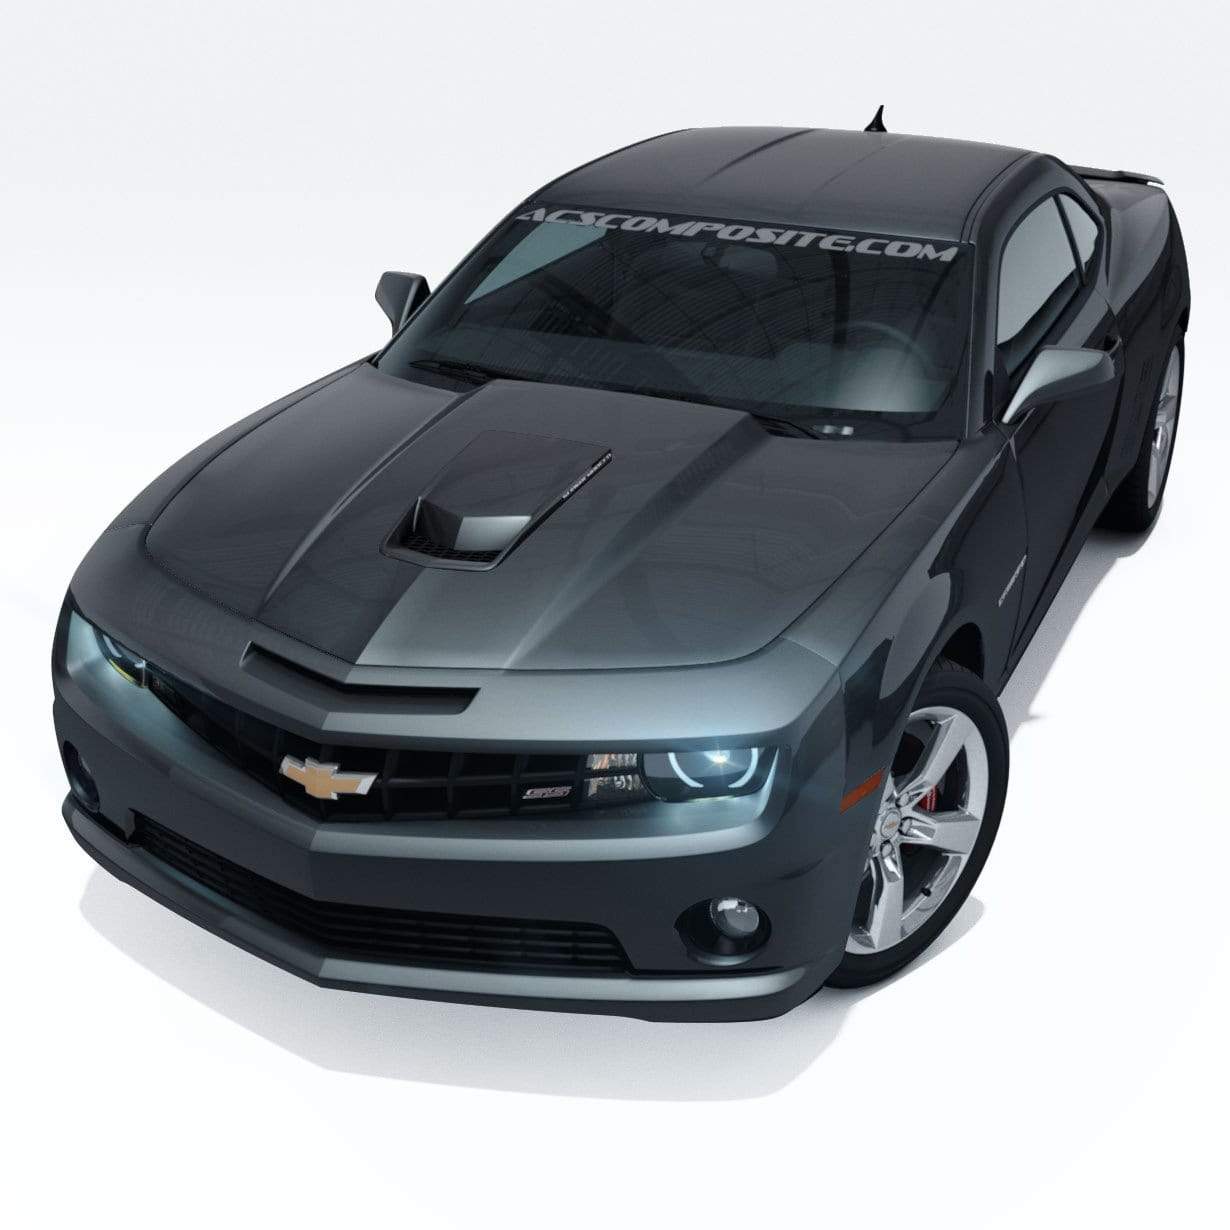 ACS Composite TLE Hood Conversion Kit for Camaro 2010-2015 SS LS LT RS, SKU 33-4-173: High-performance hood insert with optimal engine heat management and aerodynamic design.